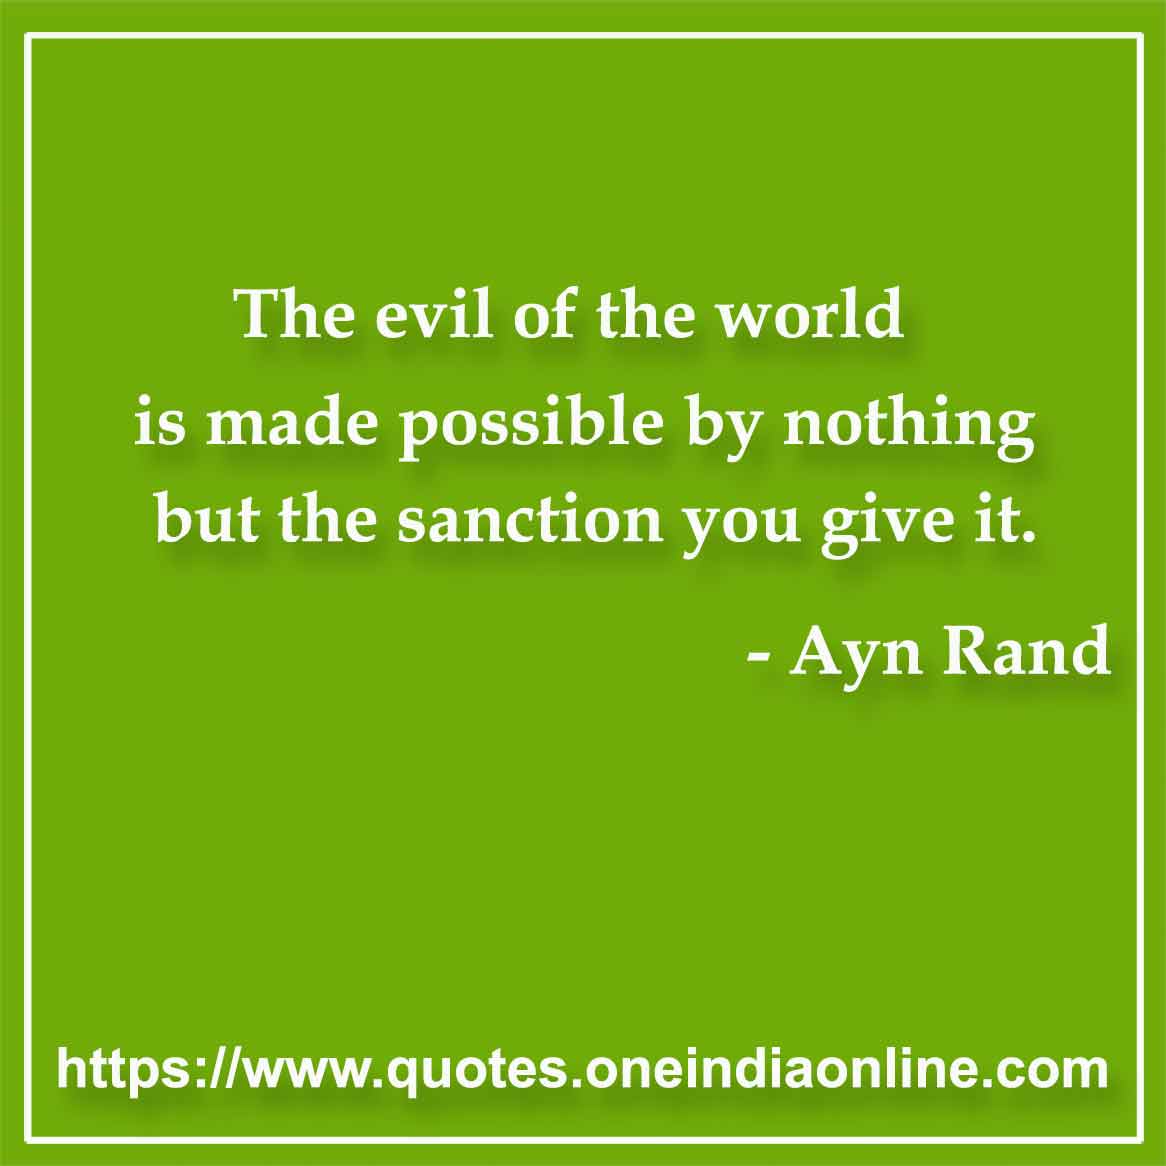 The evil of the world is made possible by nothing but the sanction you give it.

- Evil Quotes by Ayn Rand